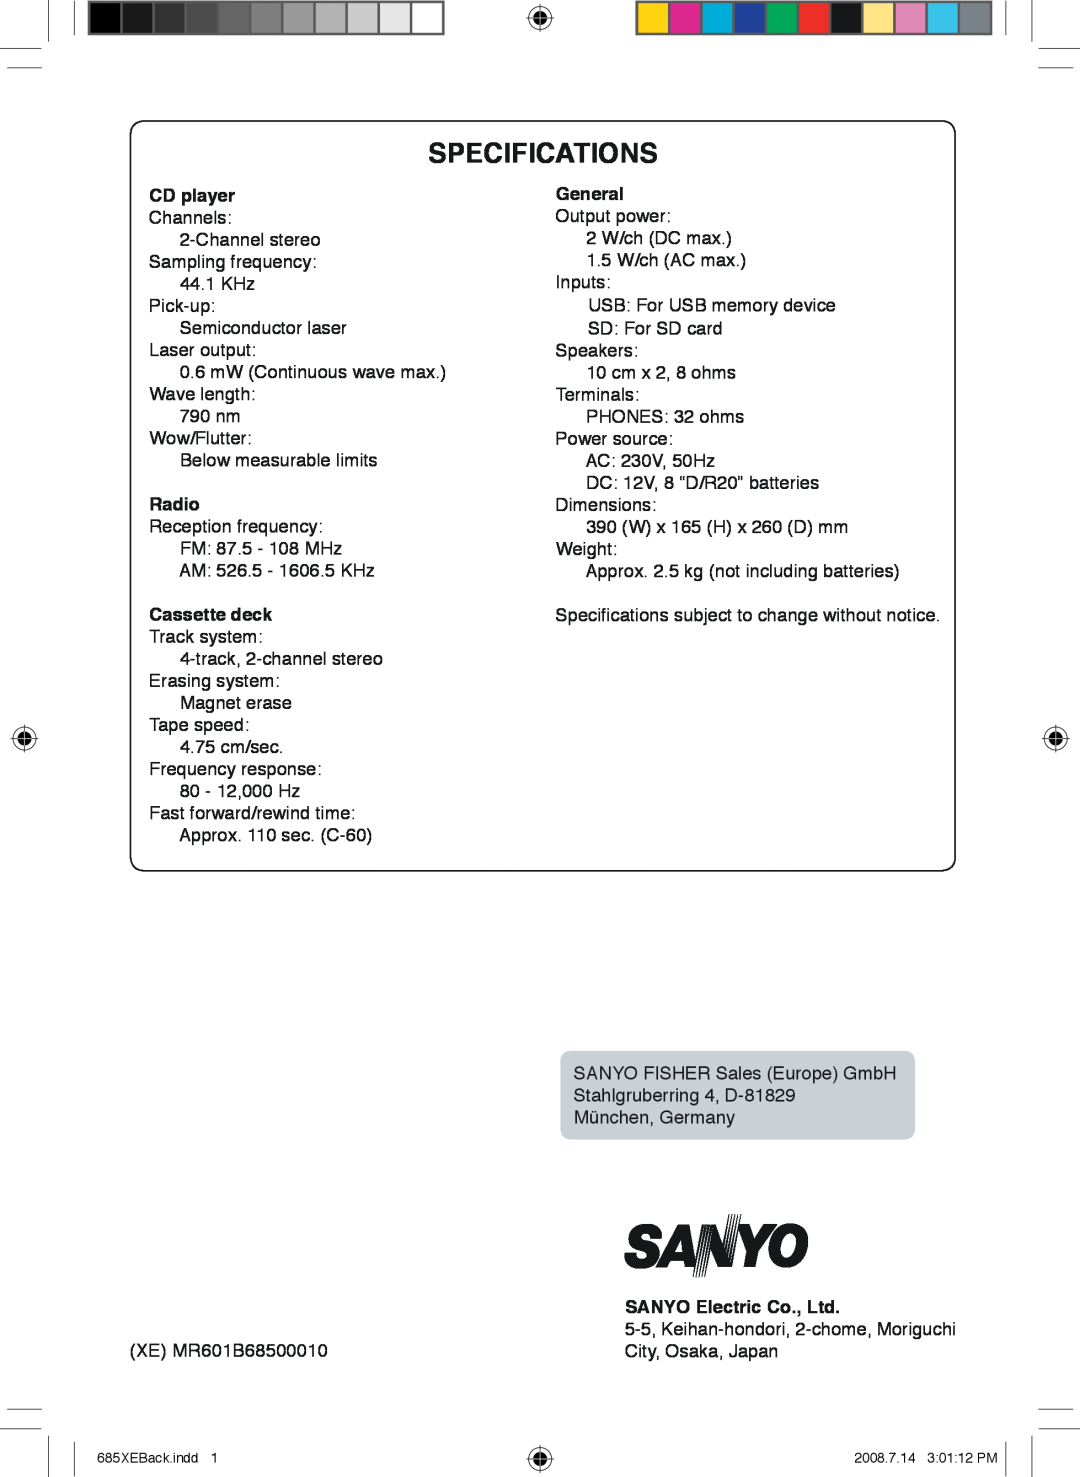 Sanyo MCD-UB685M instruction manual Specifications, CD player, General, Radio, Cassette deck 